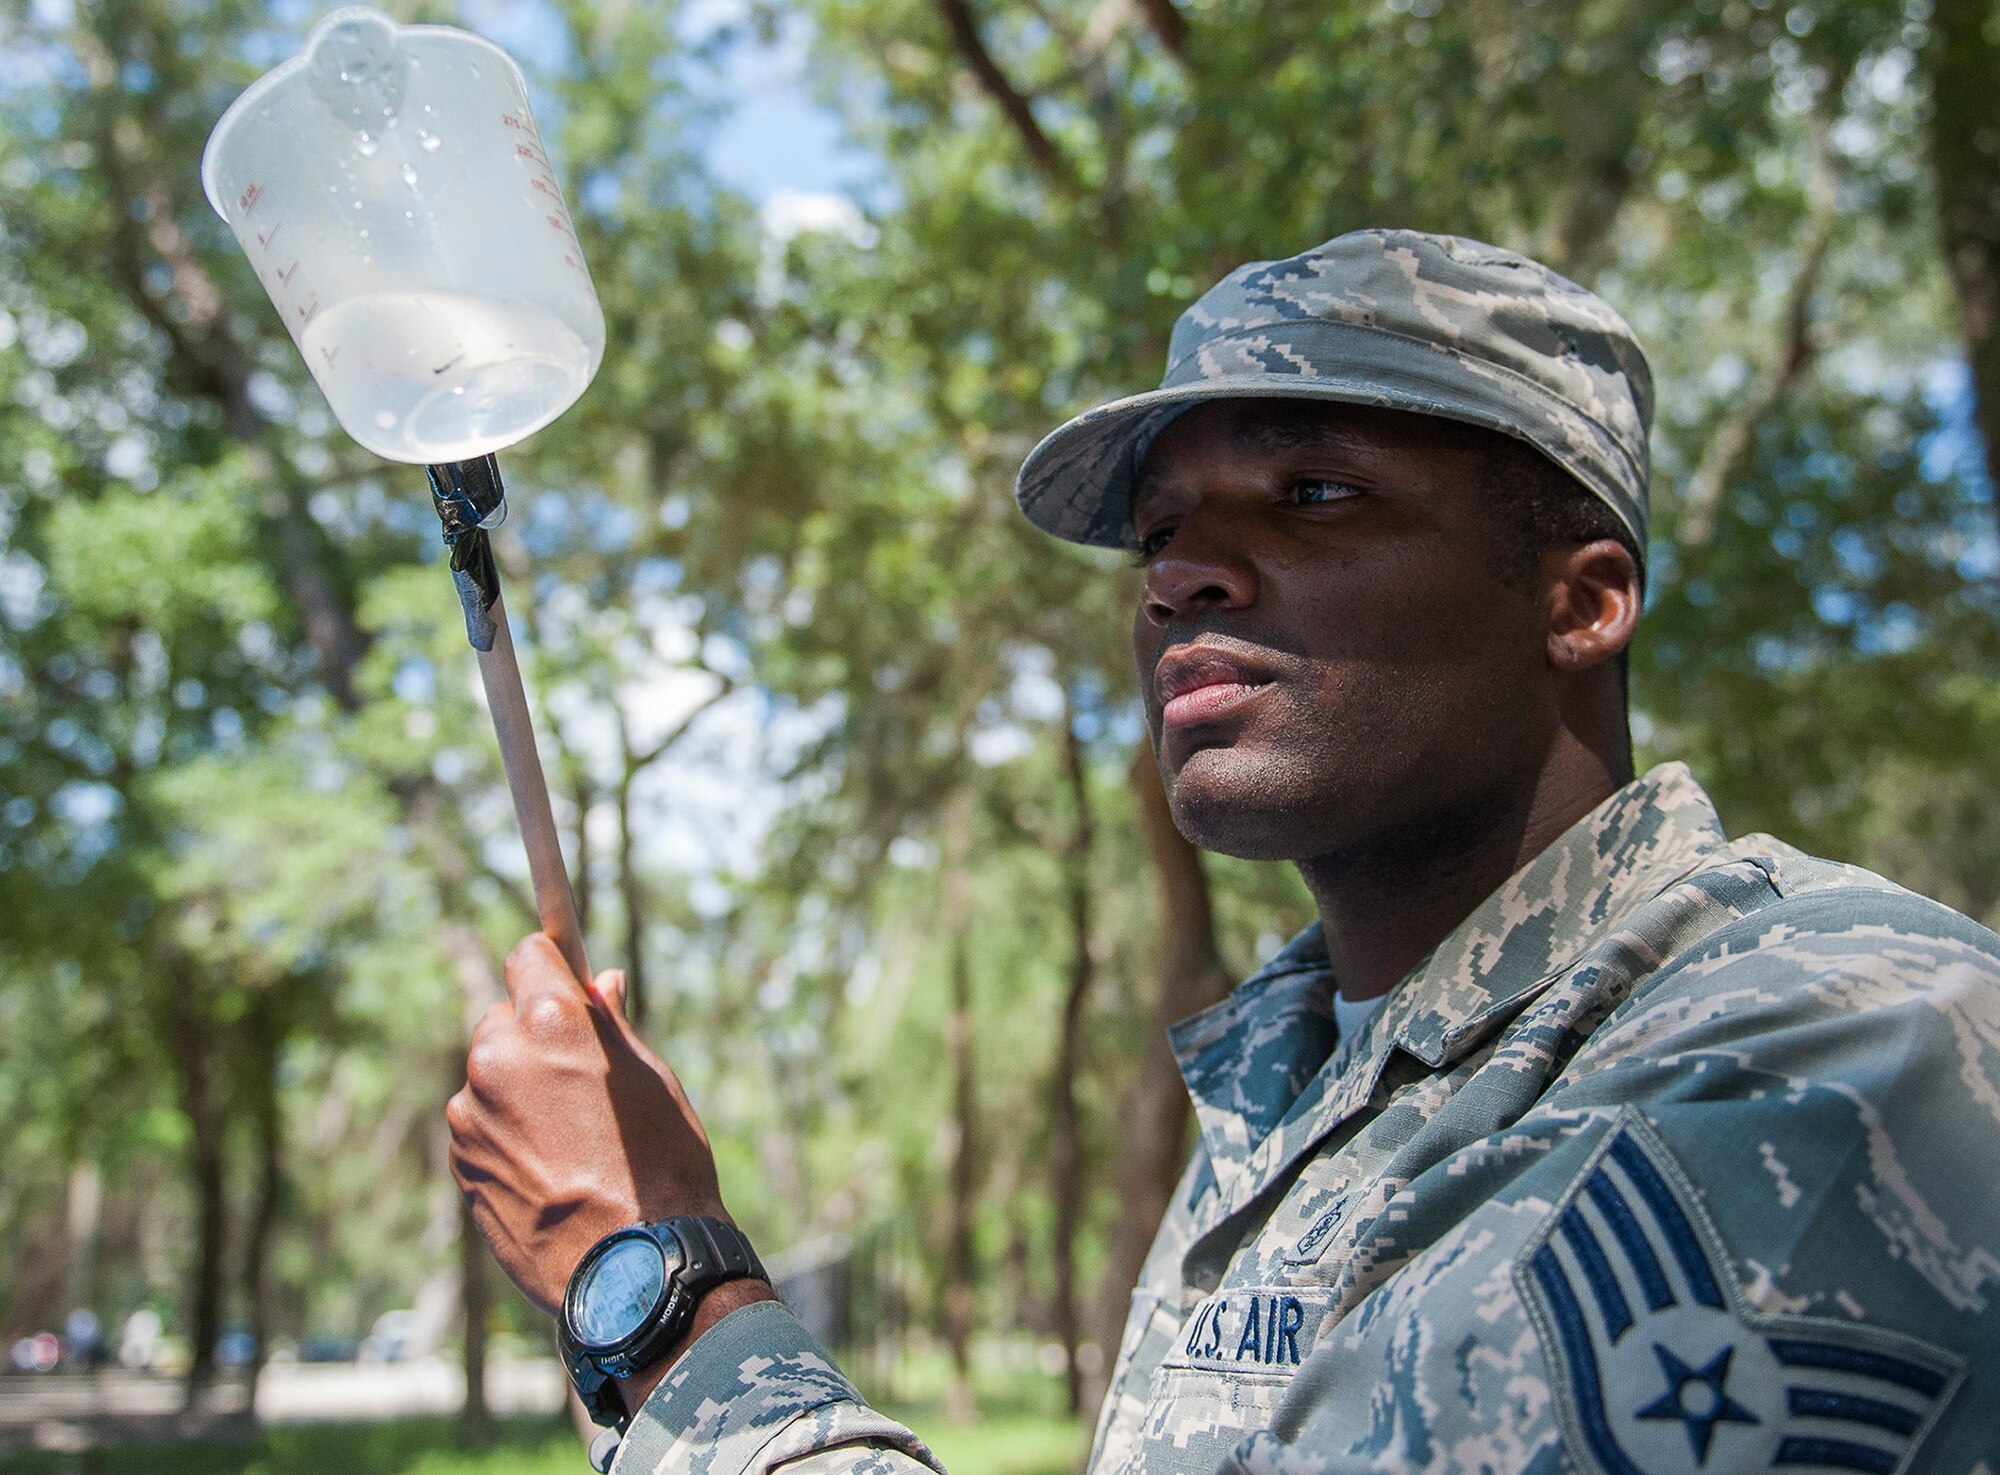 Staff Sgt Derrick Jones, 96th Aerospace Medicine Squadron public health technician, checks for mosquito larvae using a larvae dipper July 20 at Eglin Air Force Base, Fla. Jones checks the retention ponds and standing water after rainy weather periods for mosquito larvae. If larvae are found, they are collected, preserved and shipped to a lab for testing. (U.S. Air Force photo/Ilka Cole) 